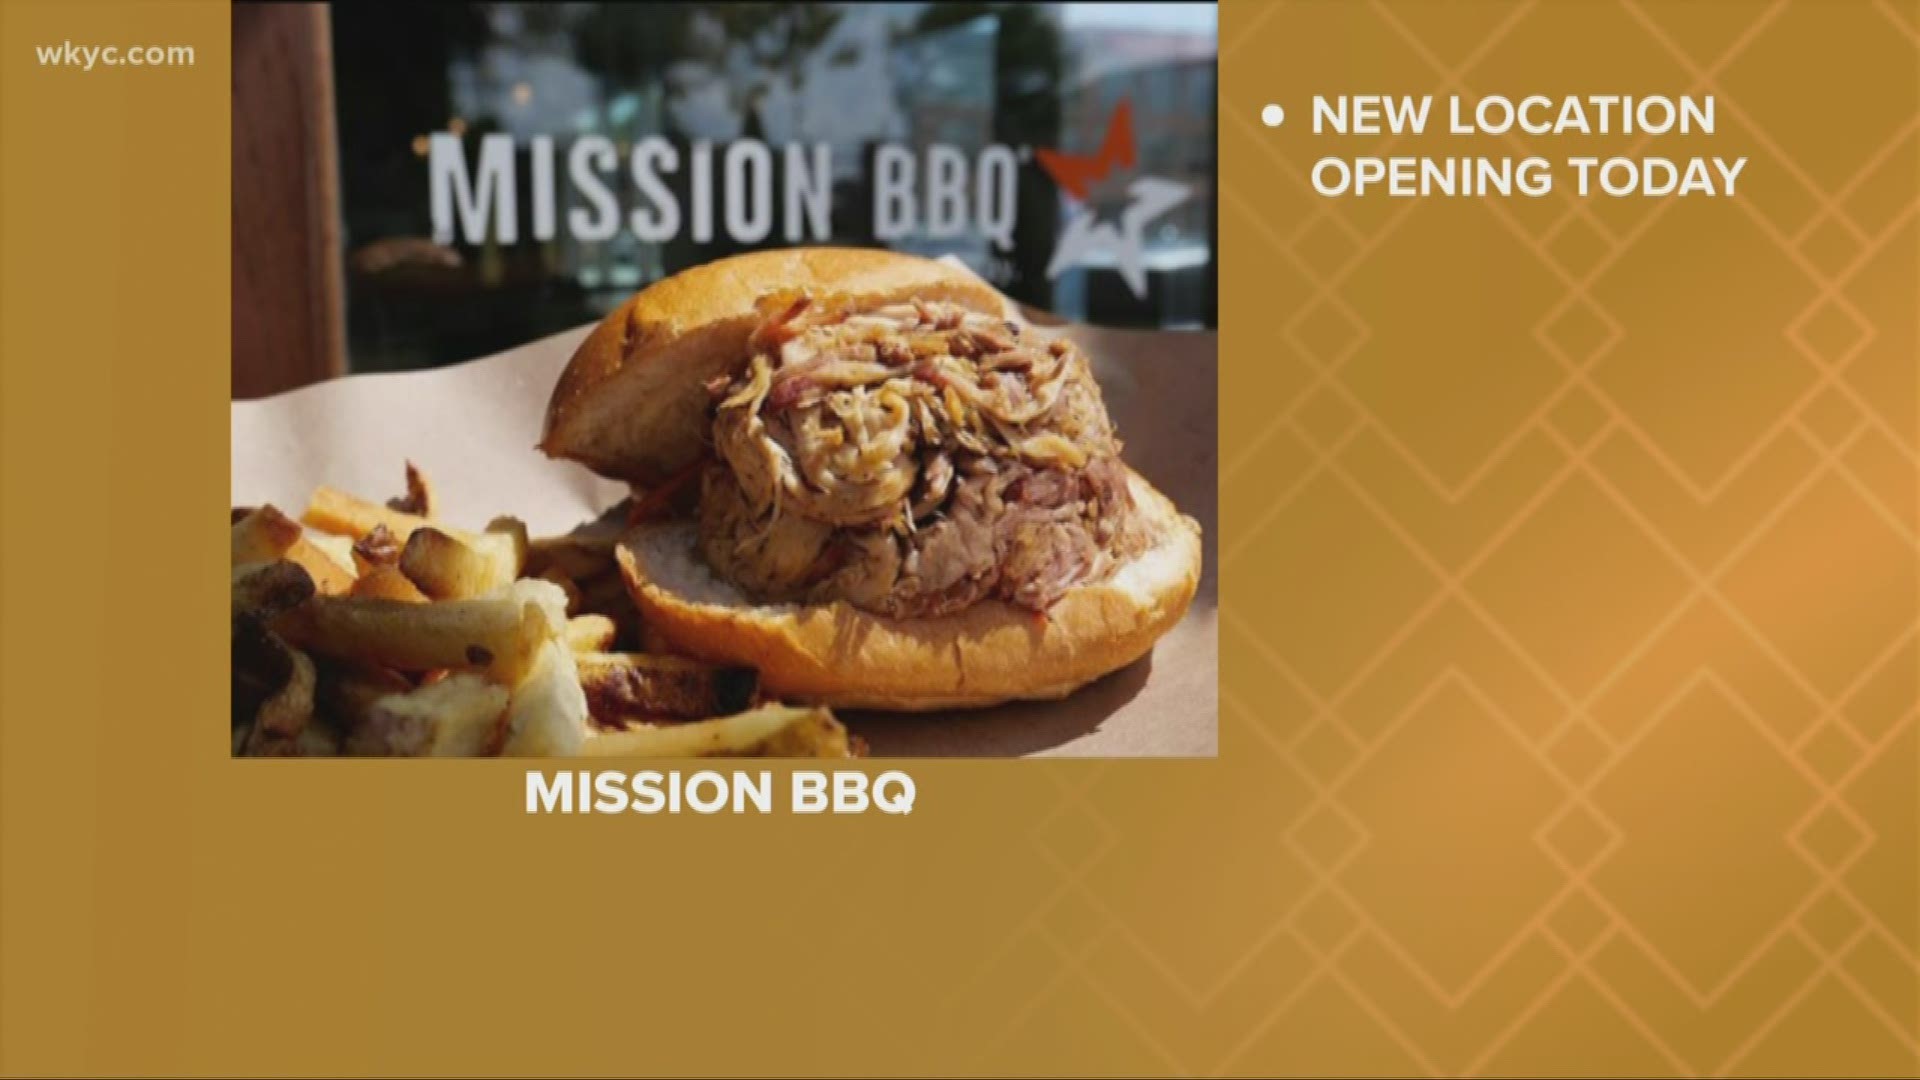 Mission BBQ opens its fourth Ohio location today -- this time in Mentor. If you've never been to a Mission BBQ, the restaurant is known for its patriotic atmosphere.